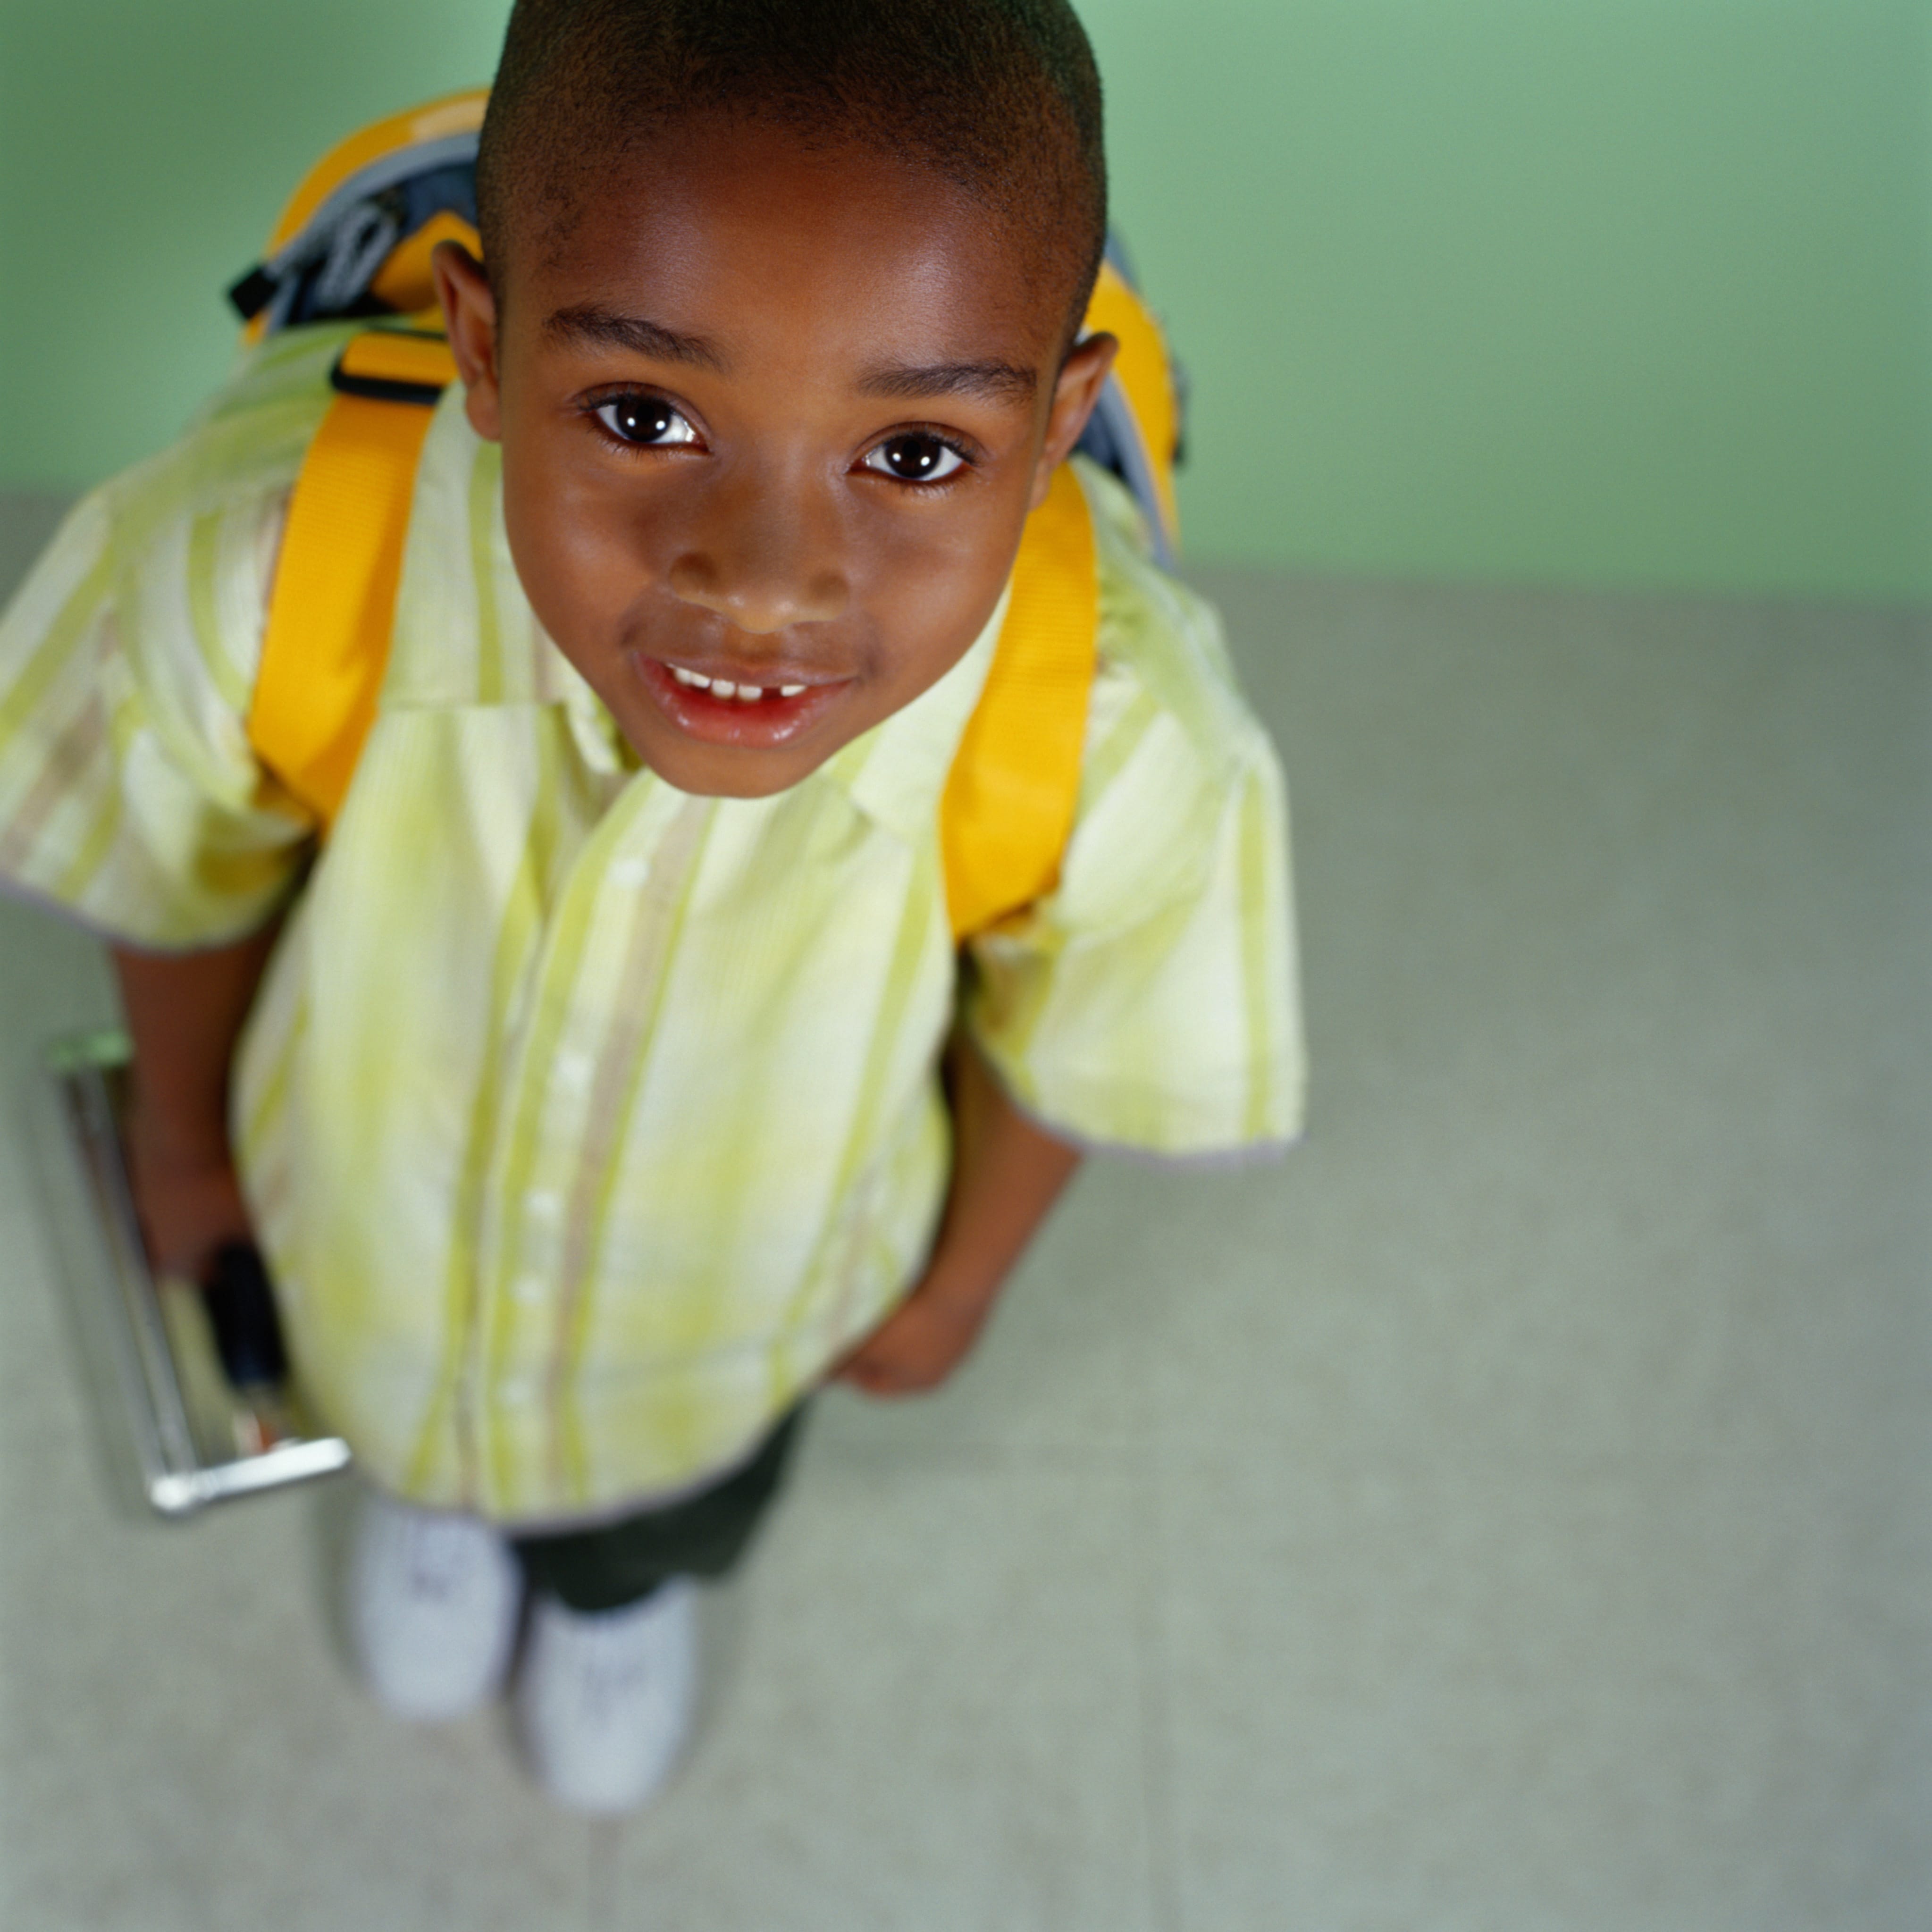 young boy with backpack ready for school